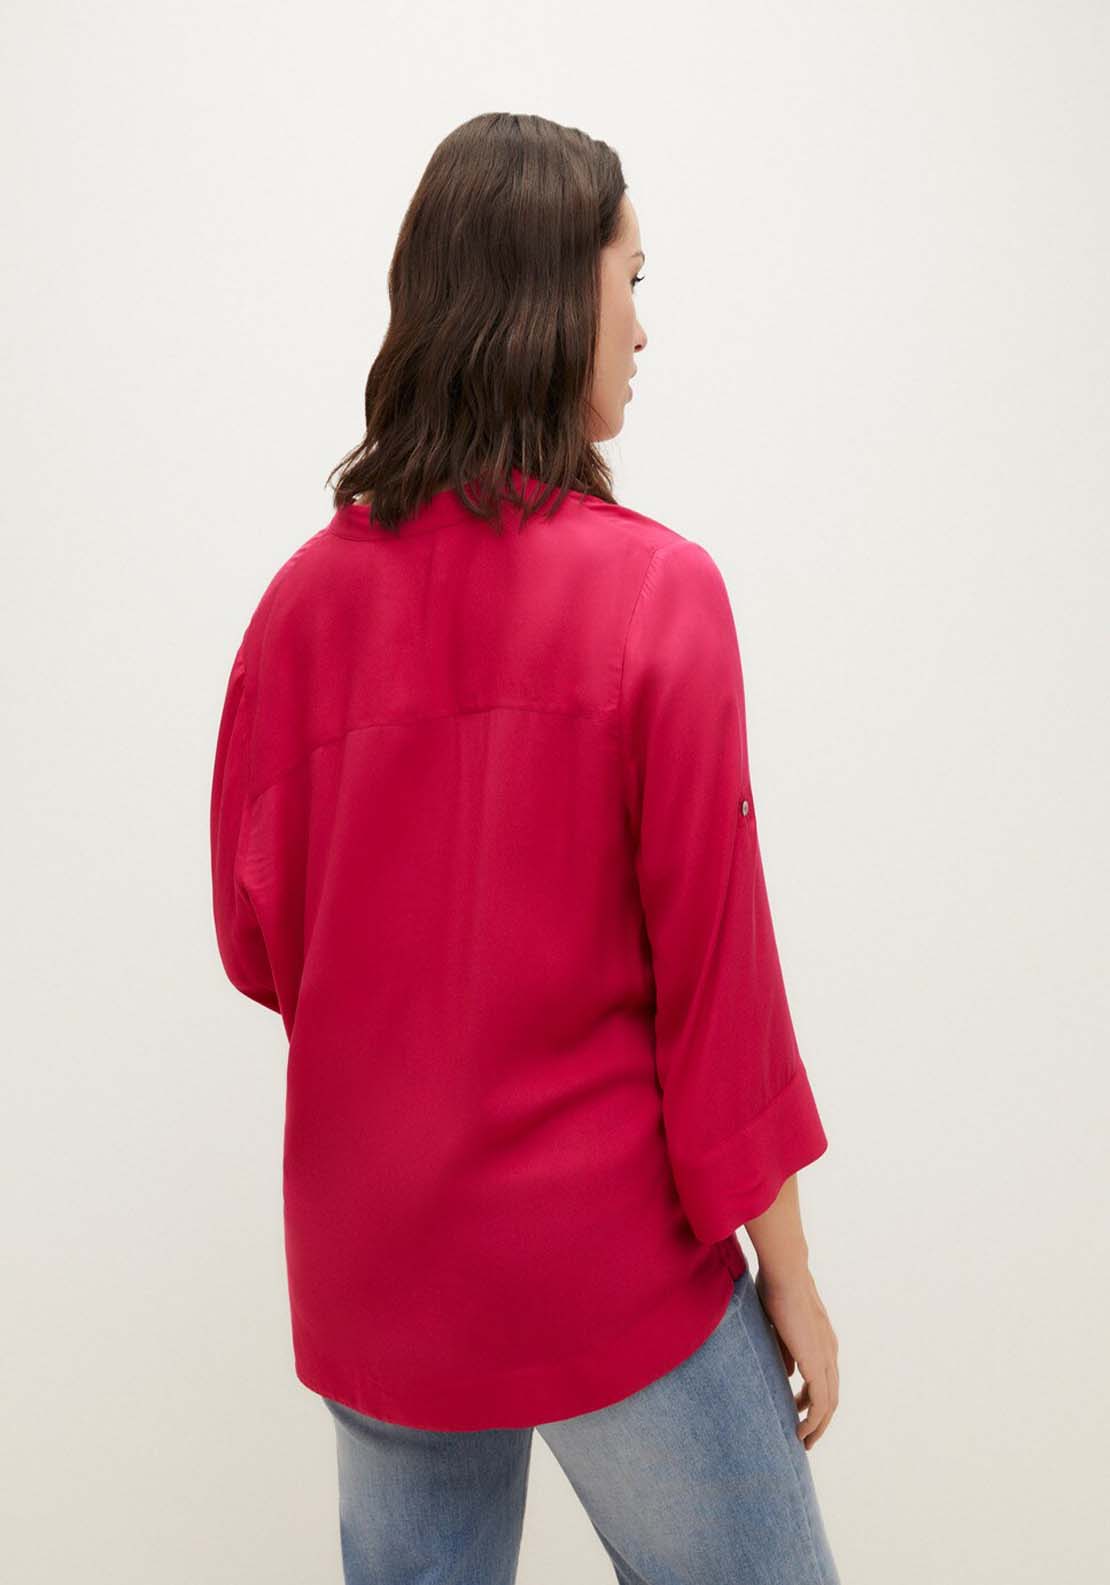 Couchel Long Sleeve Blouse - Fuchsia 2 Shaws Department Stores